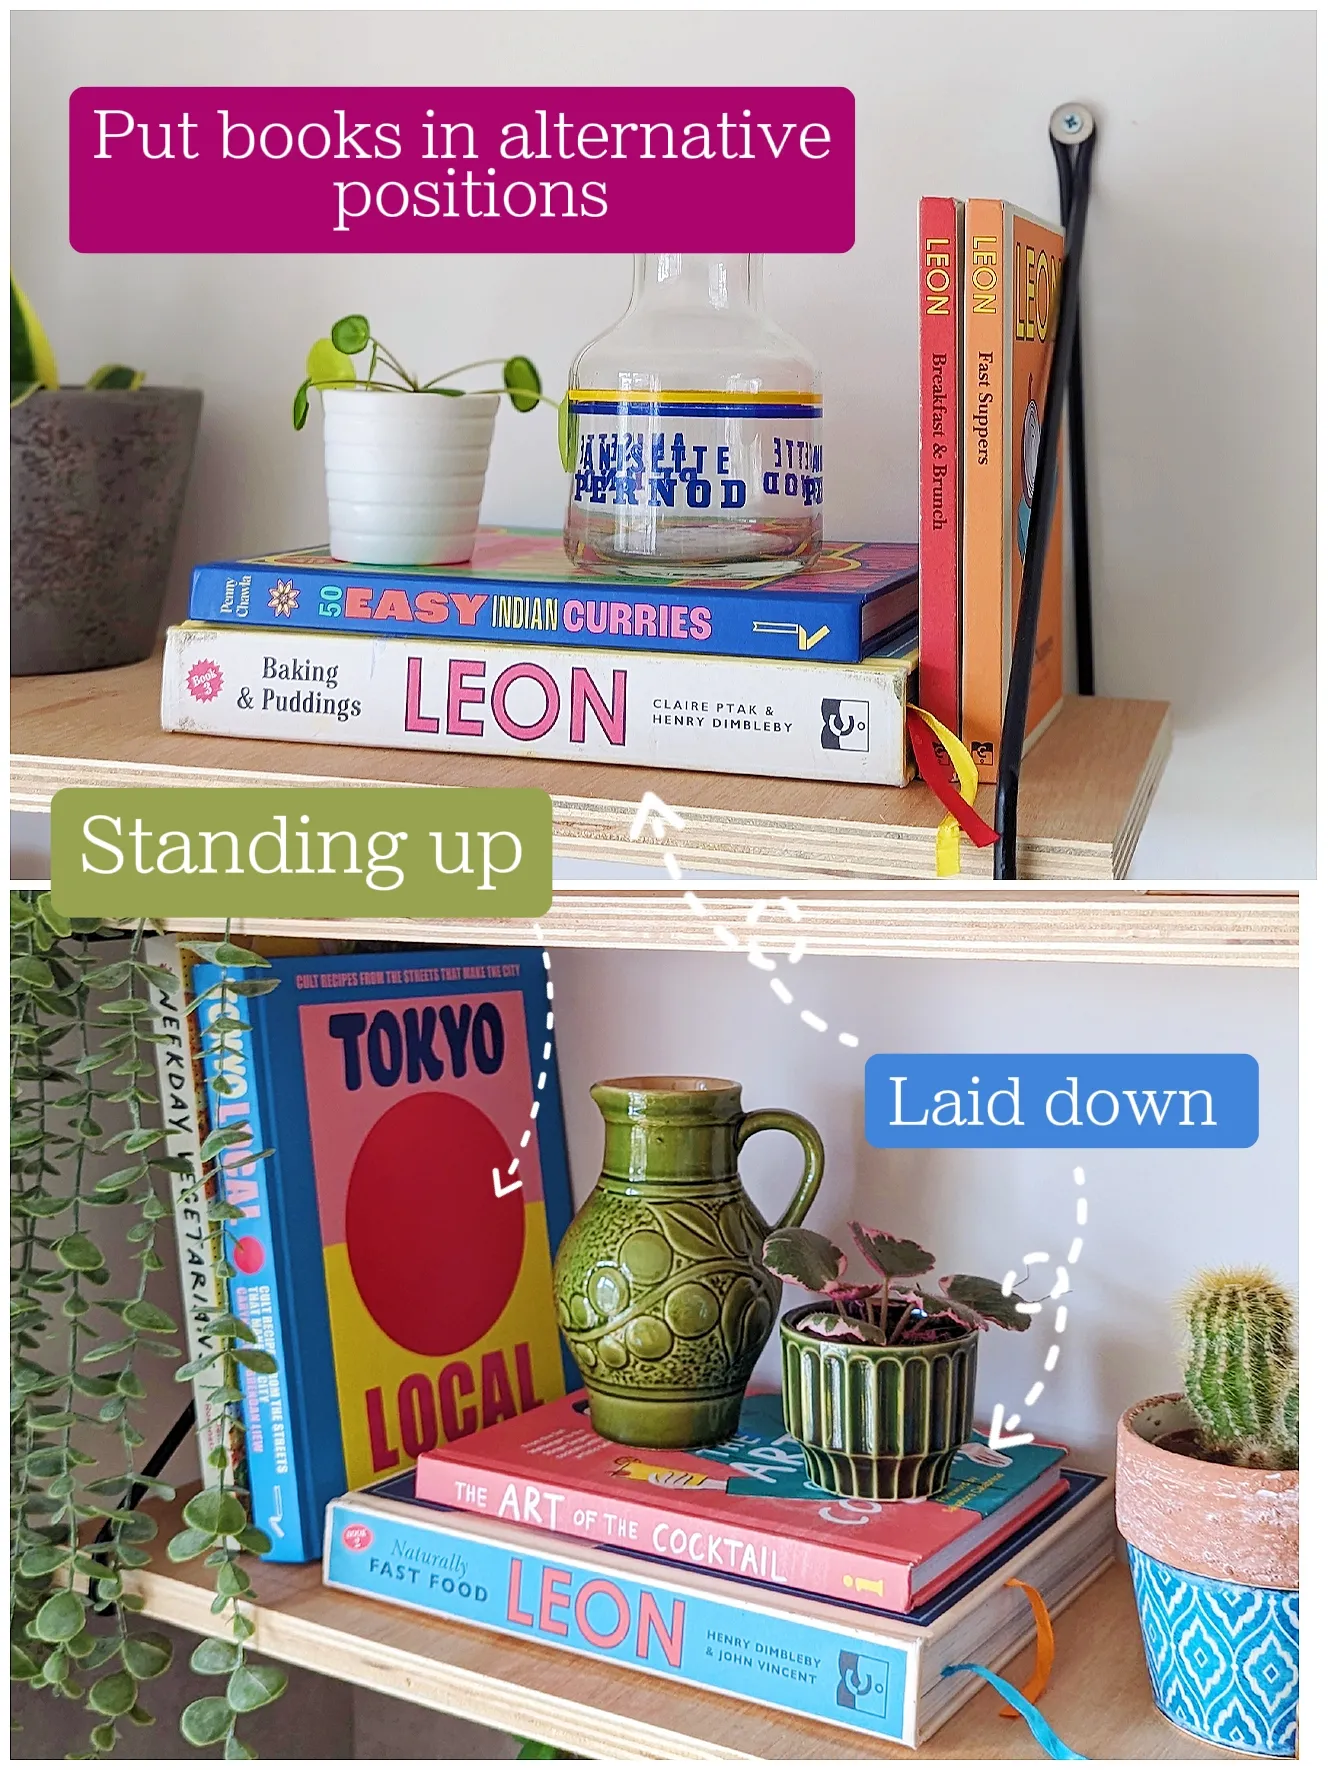 4 QUICK WAYS TO STYLE YOUR BOOKS